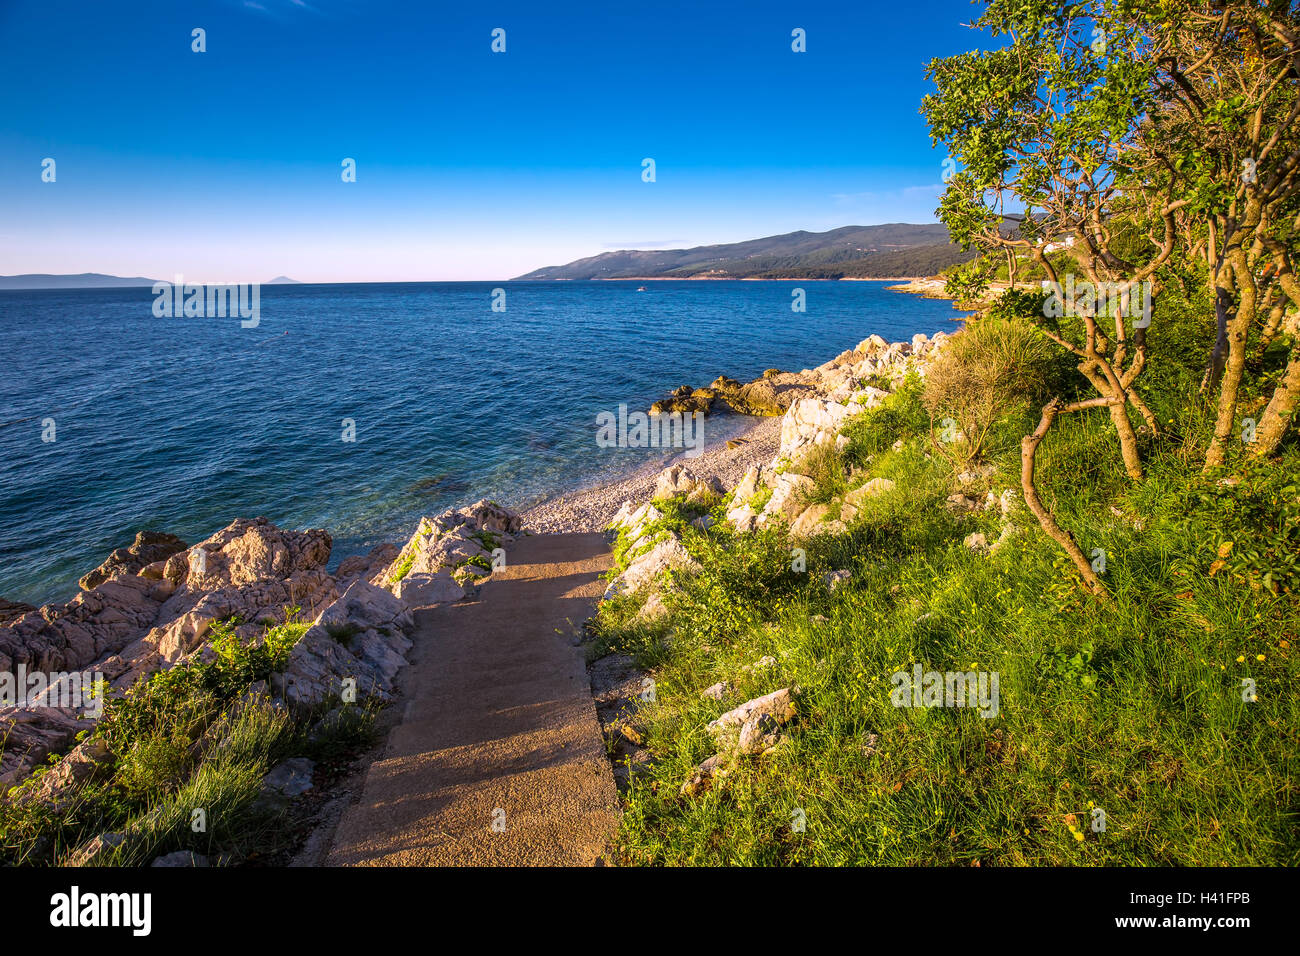 Amazing beach with crystalic clean sea water with pine trees over the Adriatic sea, Istria, Croatia Stock Photo